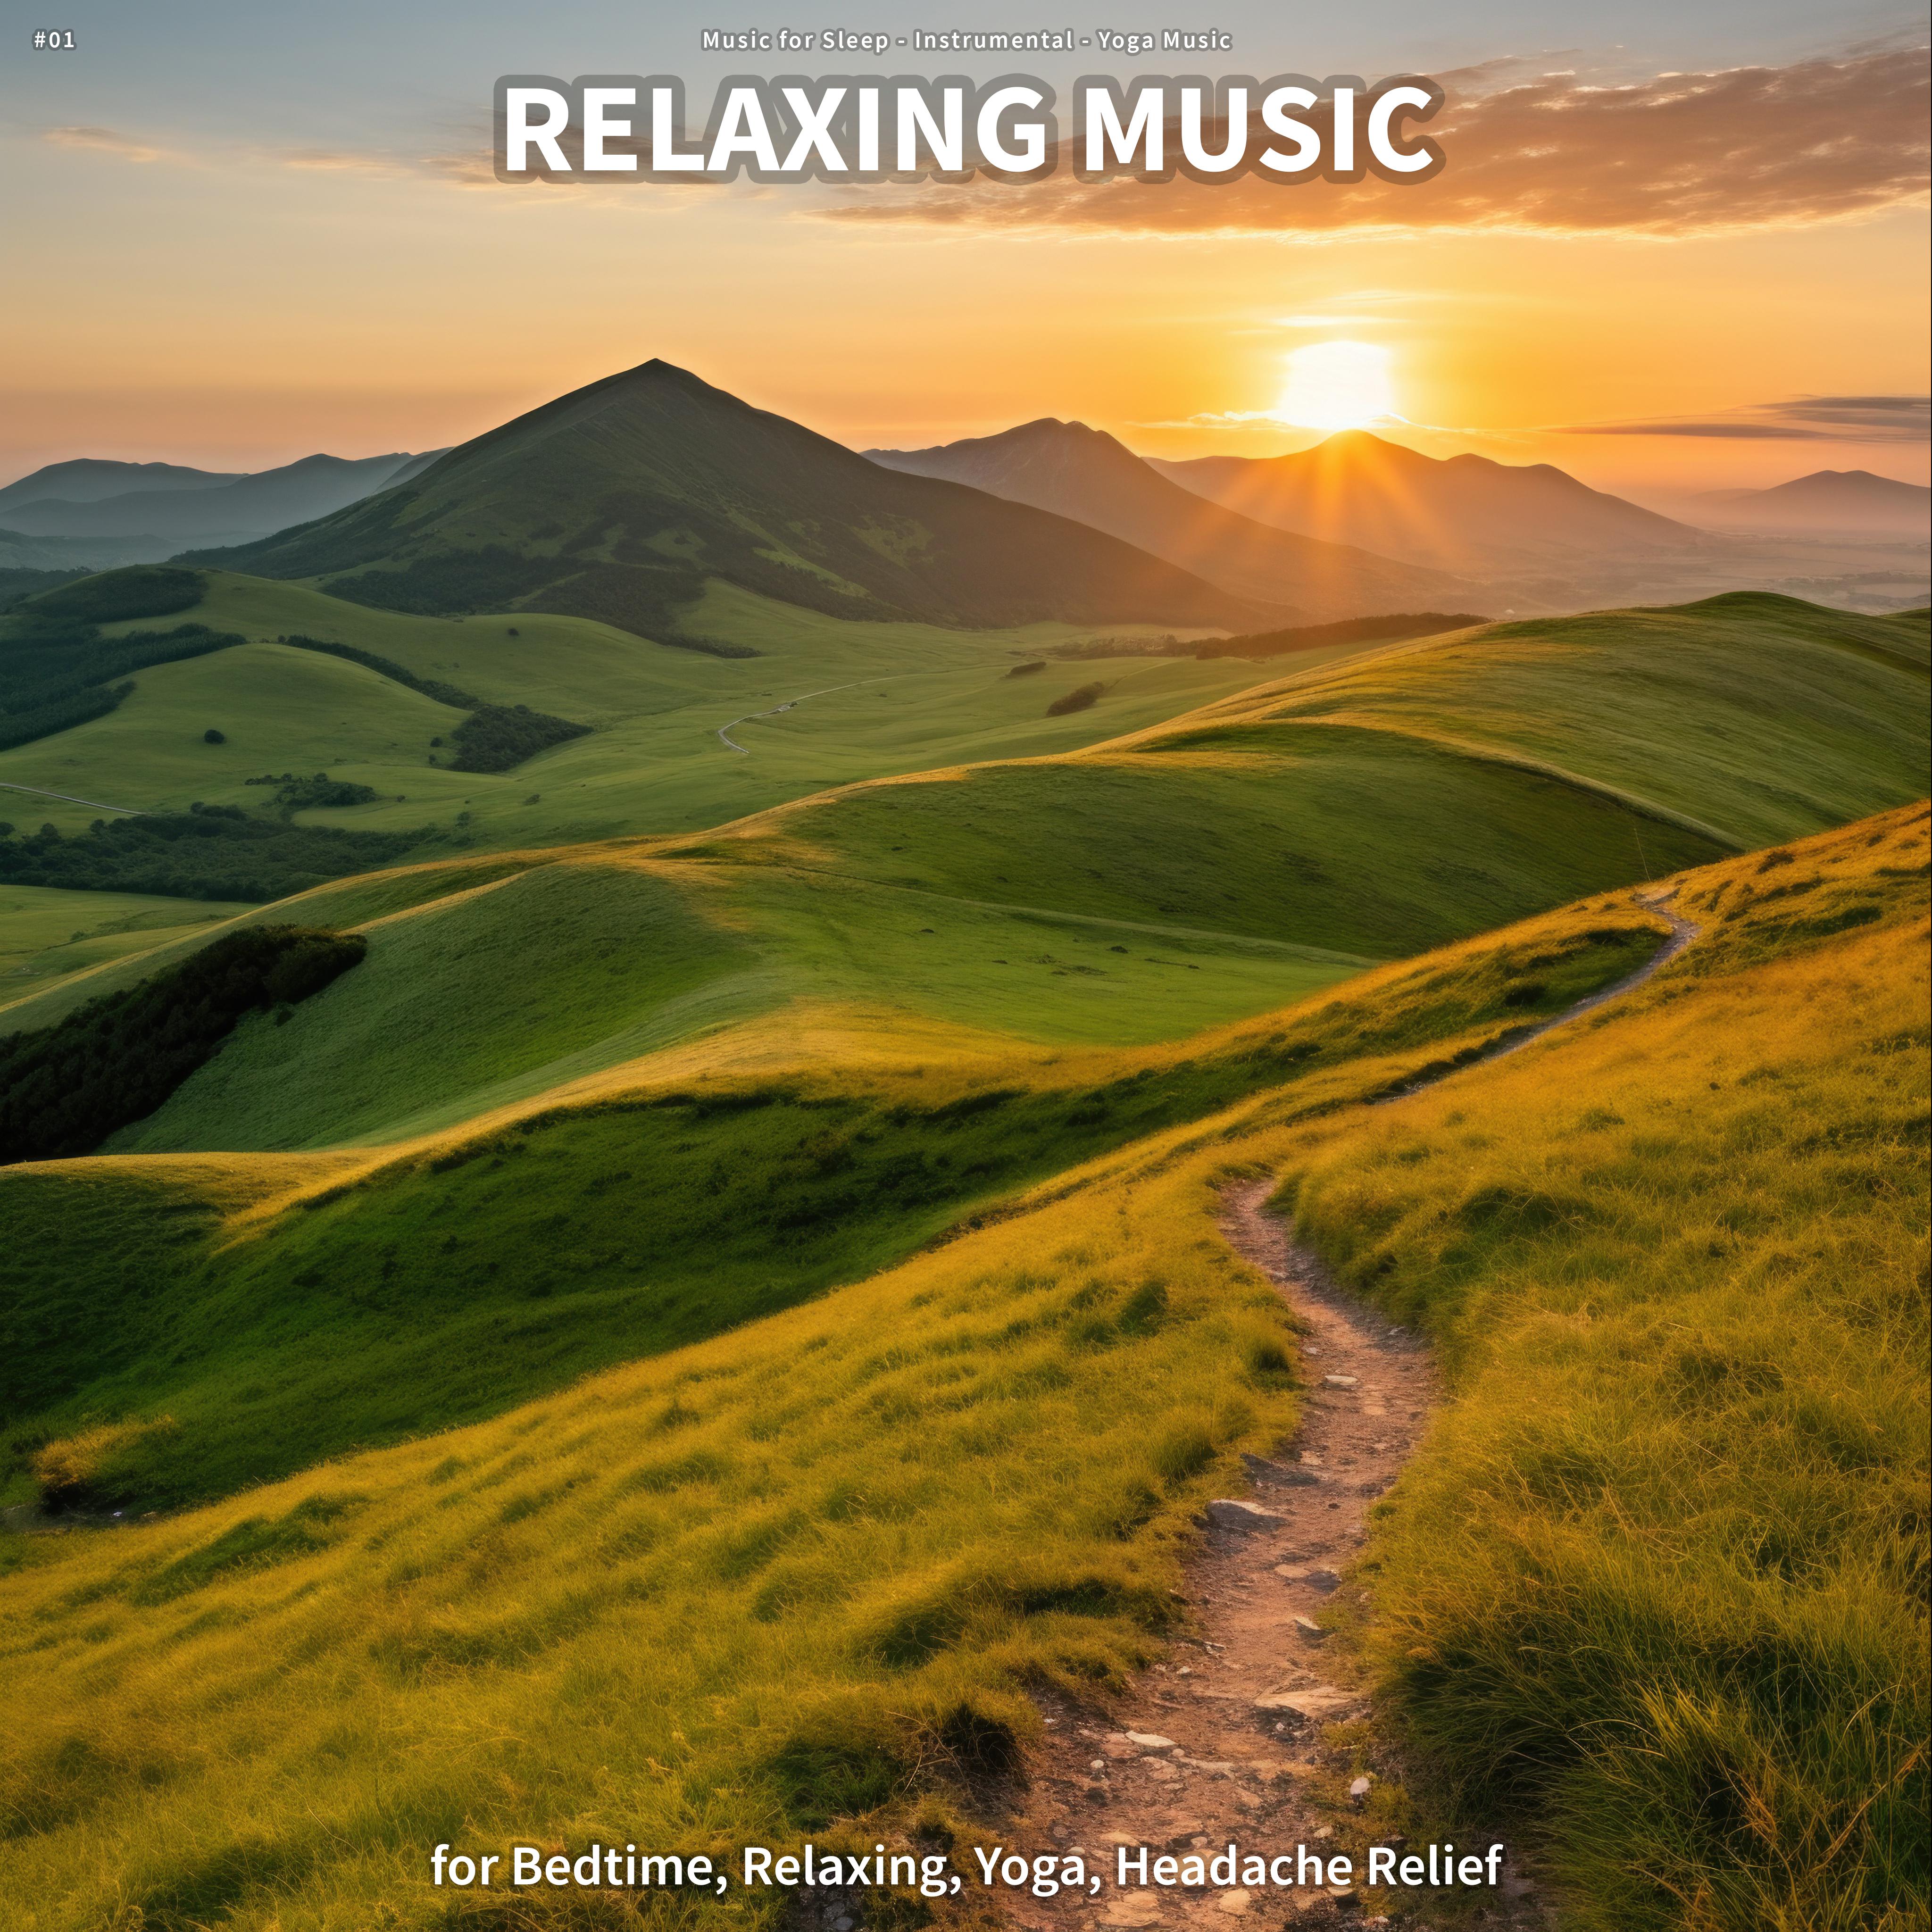 Music for Sleep - Soothing Music